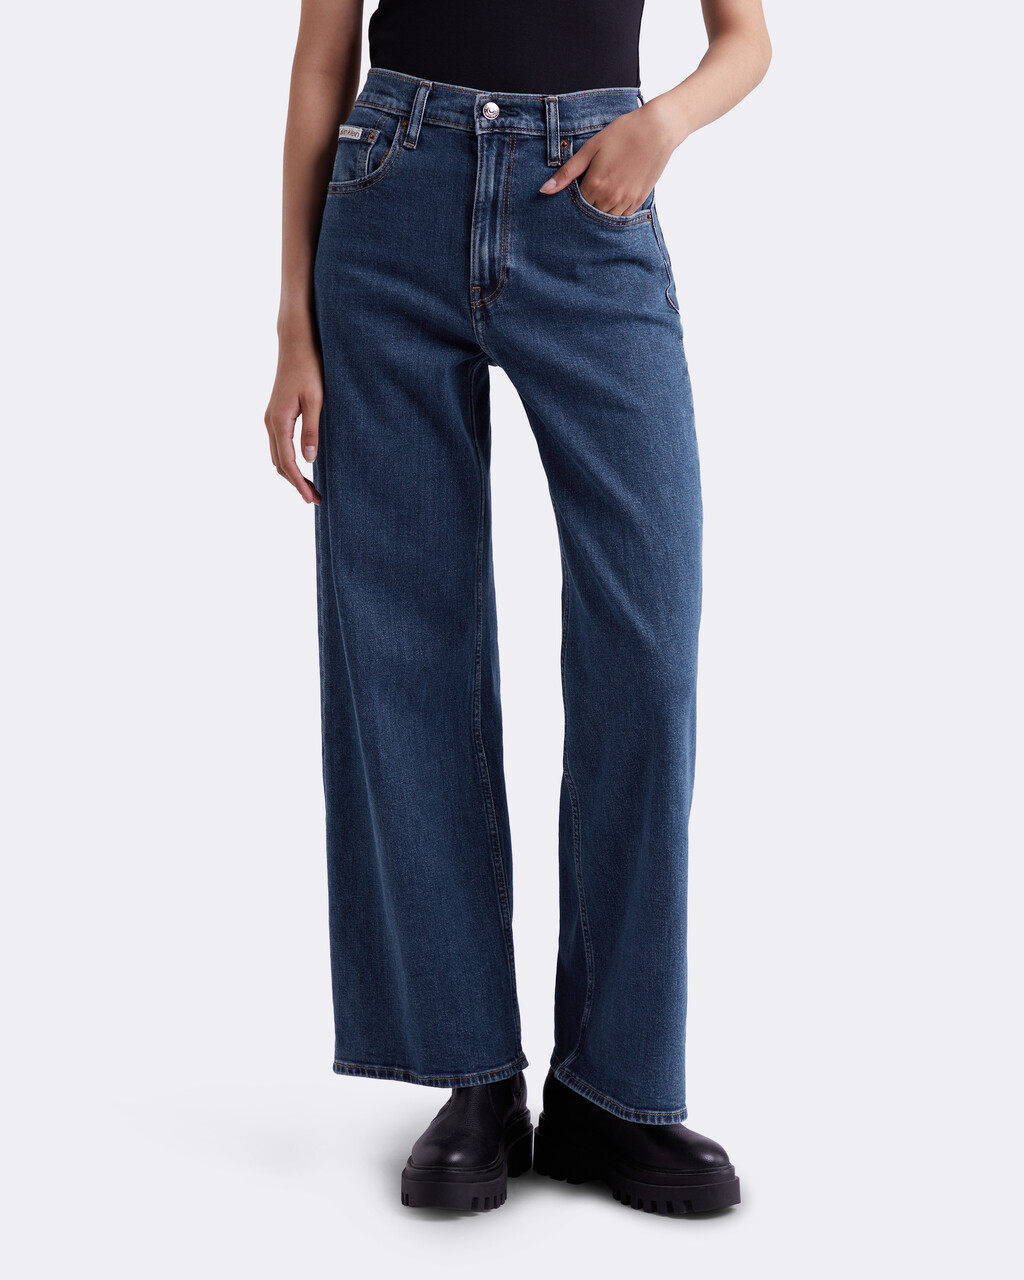 Ultra High Rise Wide Leg Fit Jeans, PACIFICO, hi-res